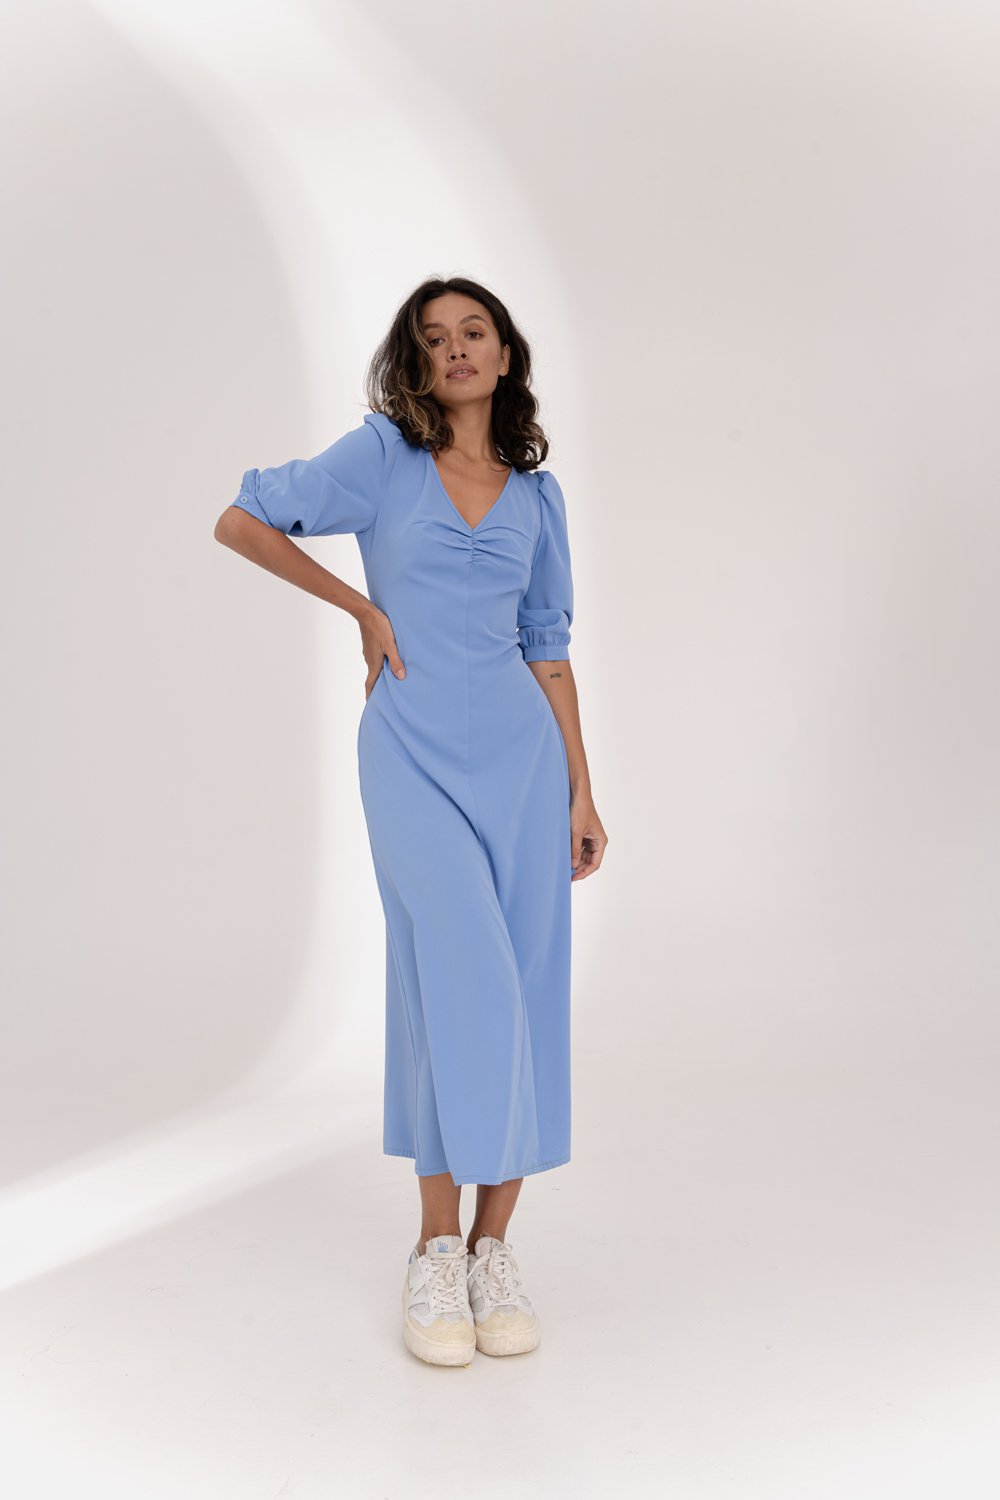 Blue flowy dress with ruching at the chest